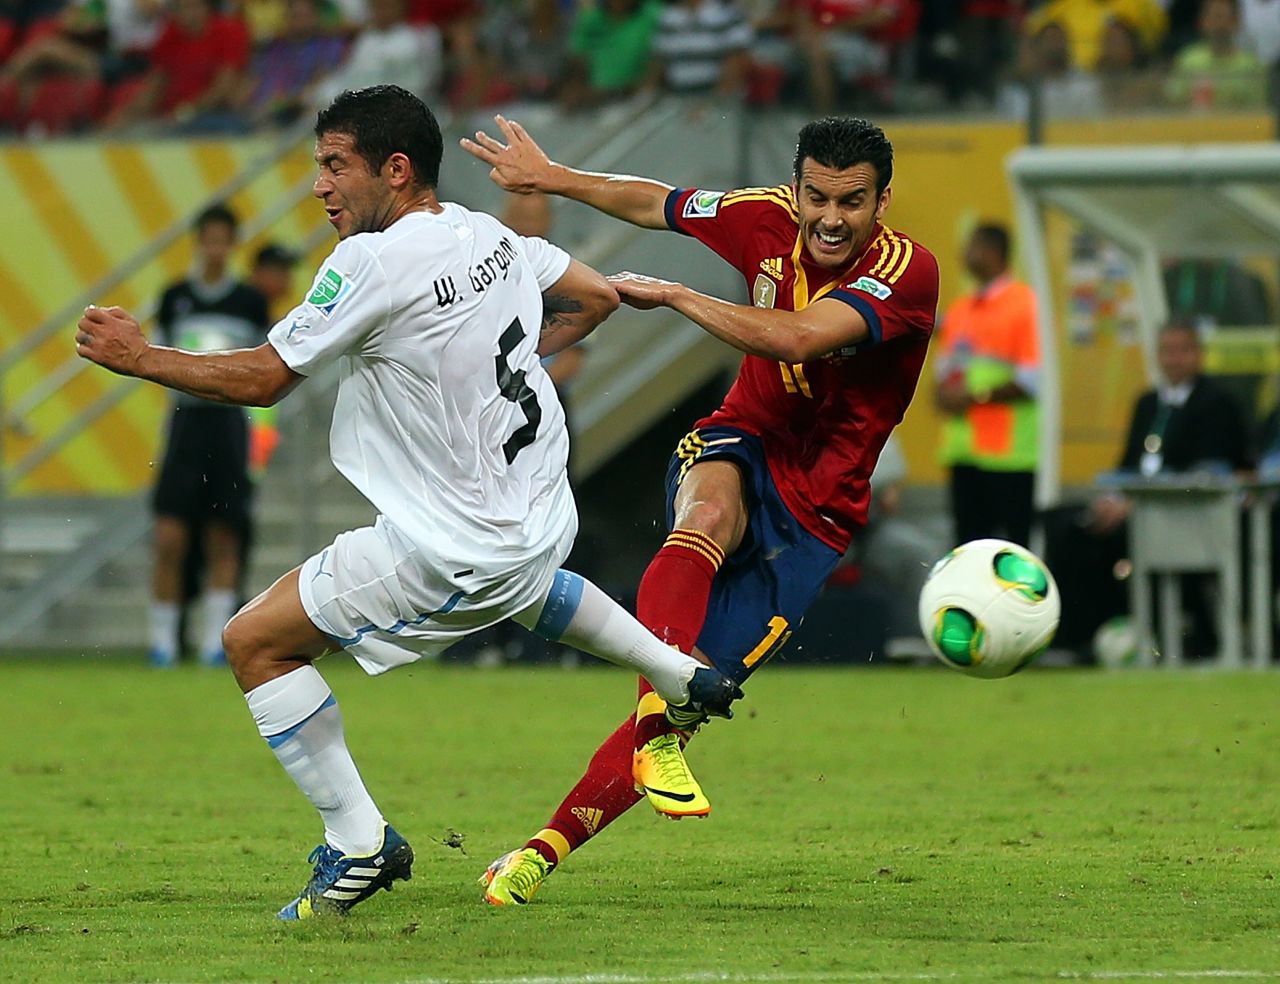 Pedro had put Spain ahead in the 20th minute when his shot took a wicked deflection off Uruguay captain Diego Lugano.